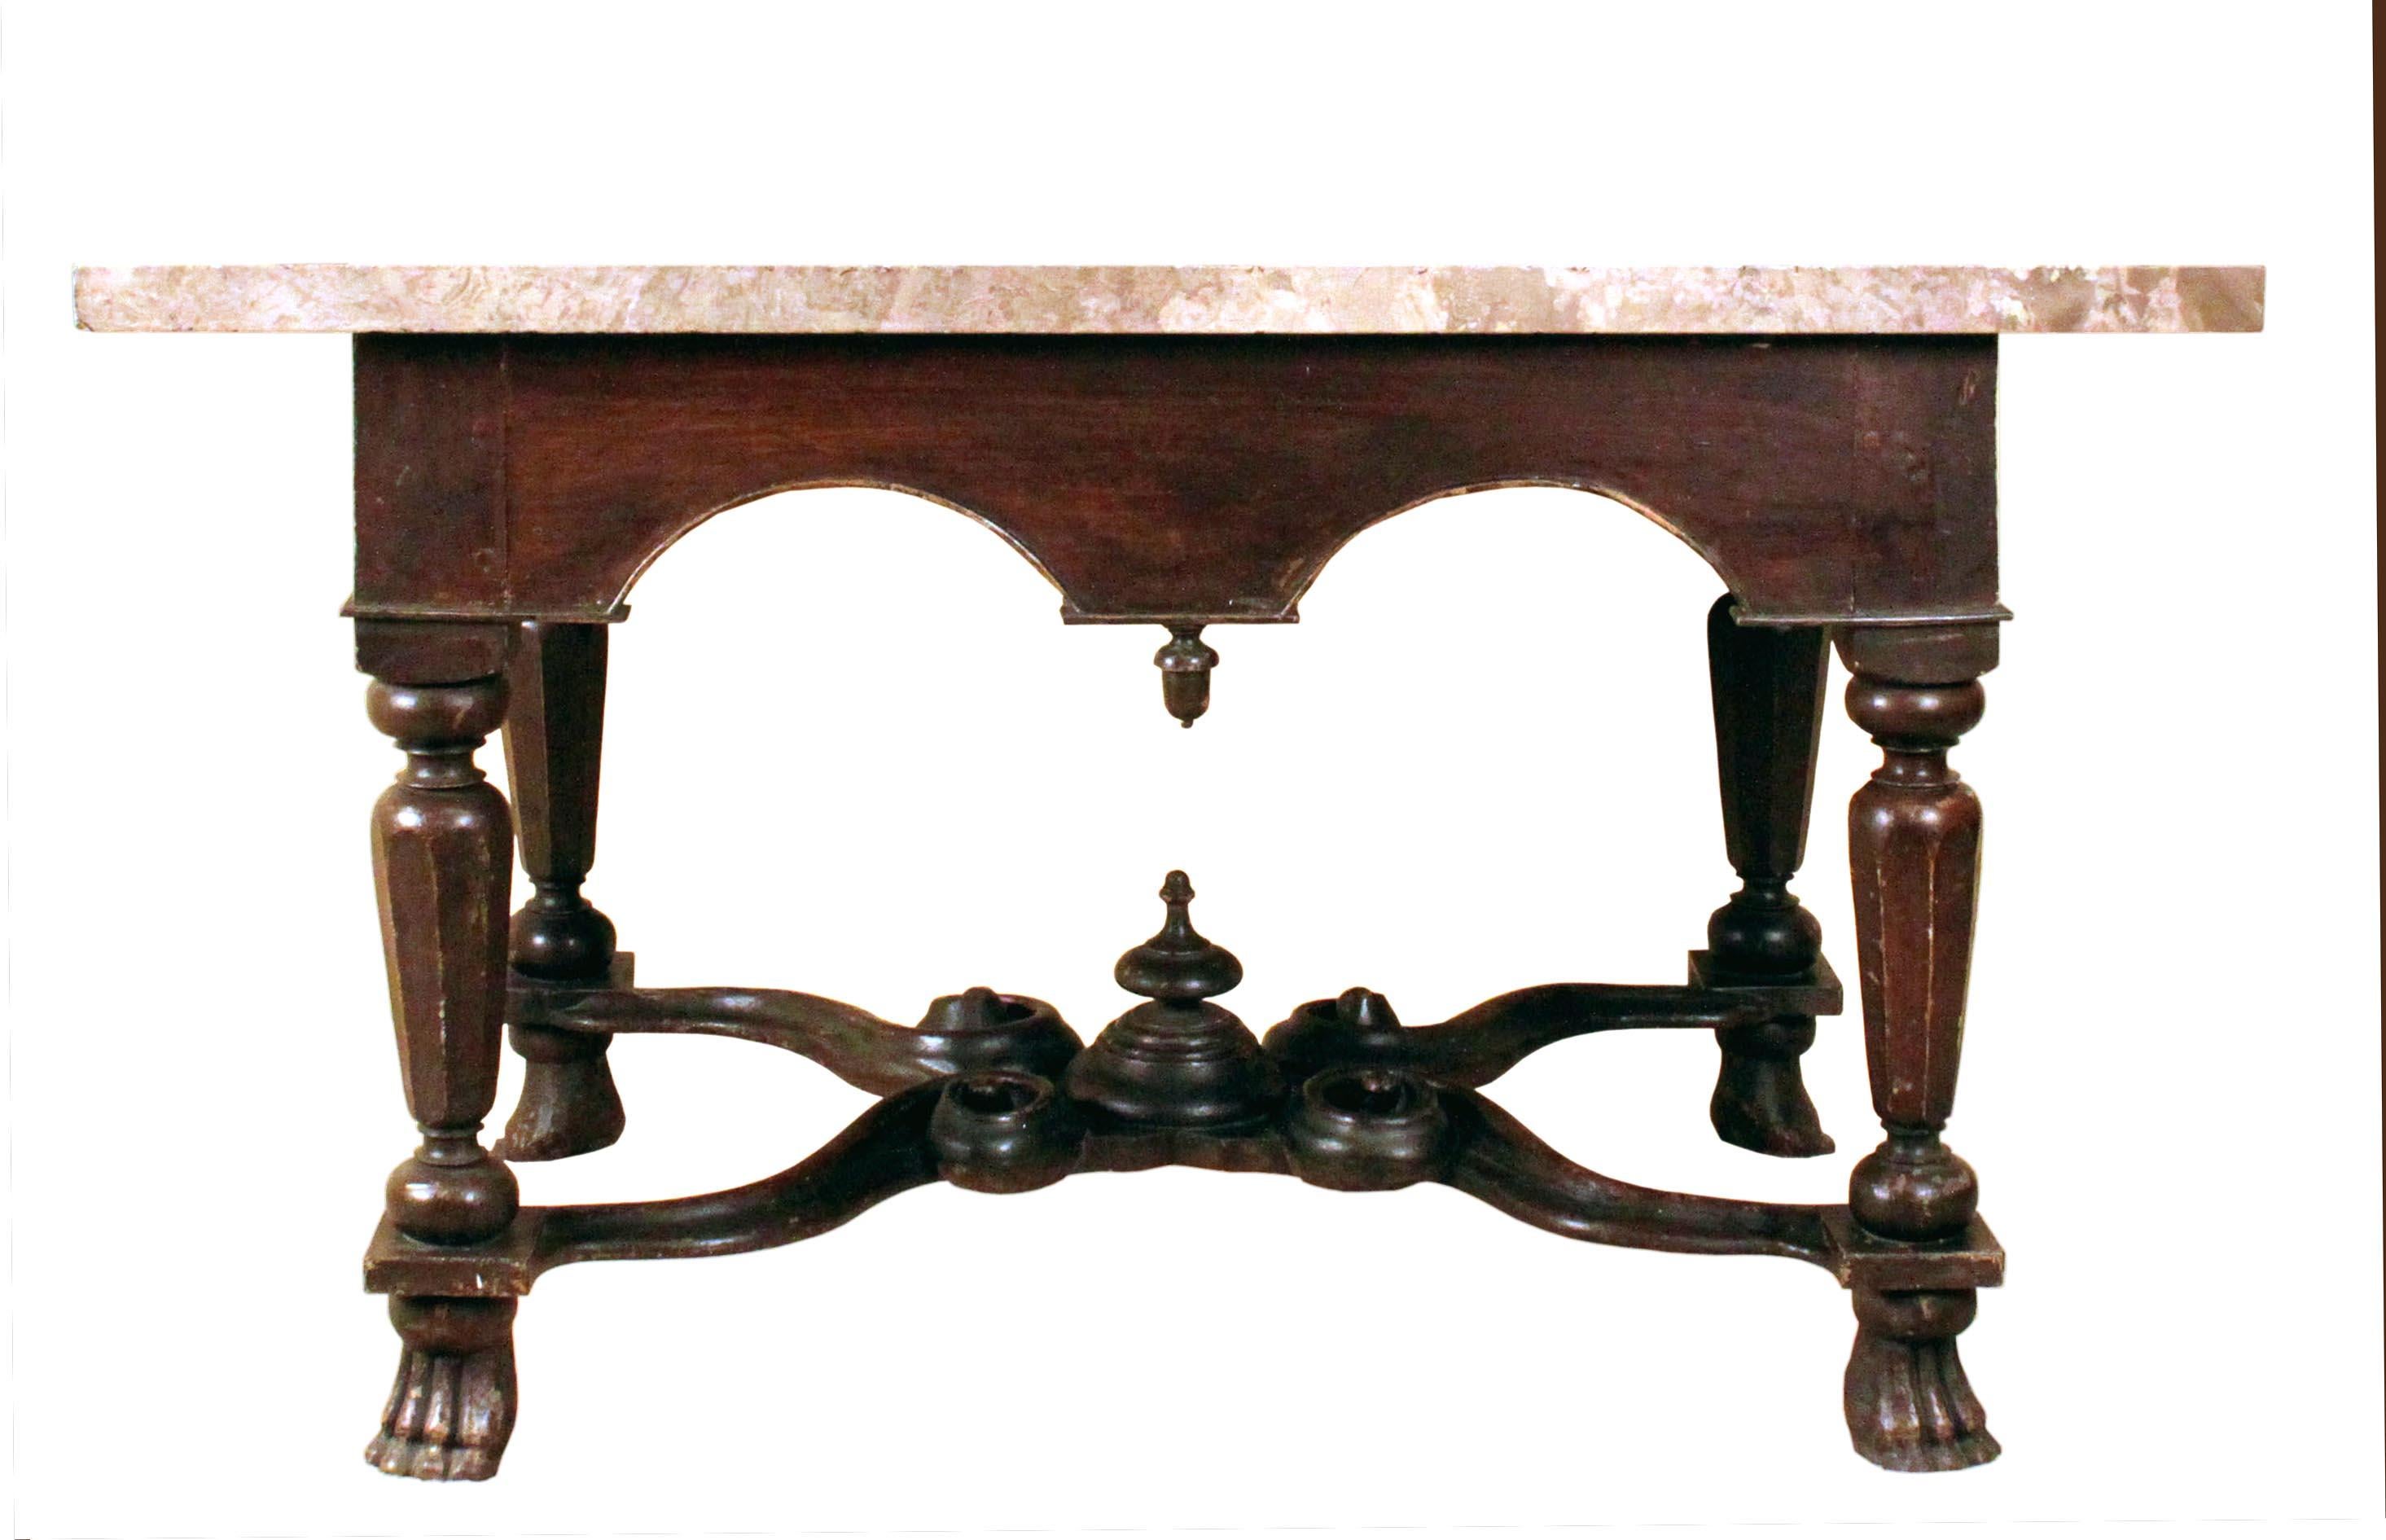 A very rare William & Mary pier table in the manner of Daniel Marot: shaped friezes on three sides and a scrolling X stretcher with braganza feet: in its original simulated grained oak paint and with a fine but associated marble top. This was